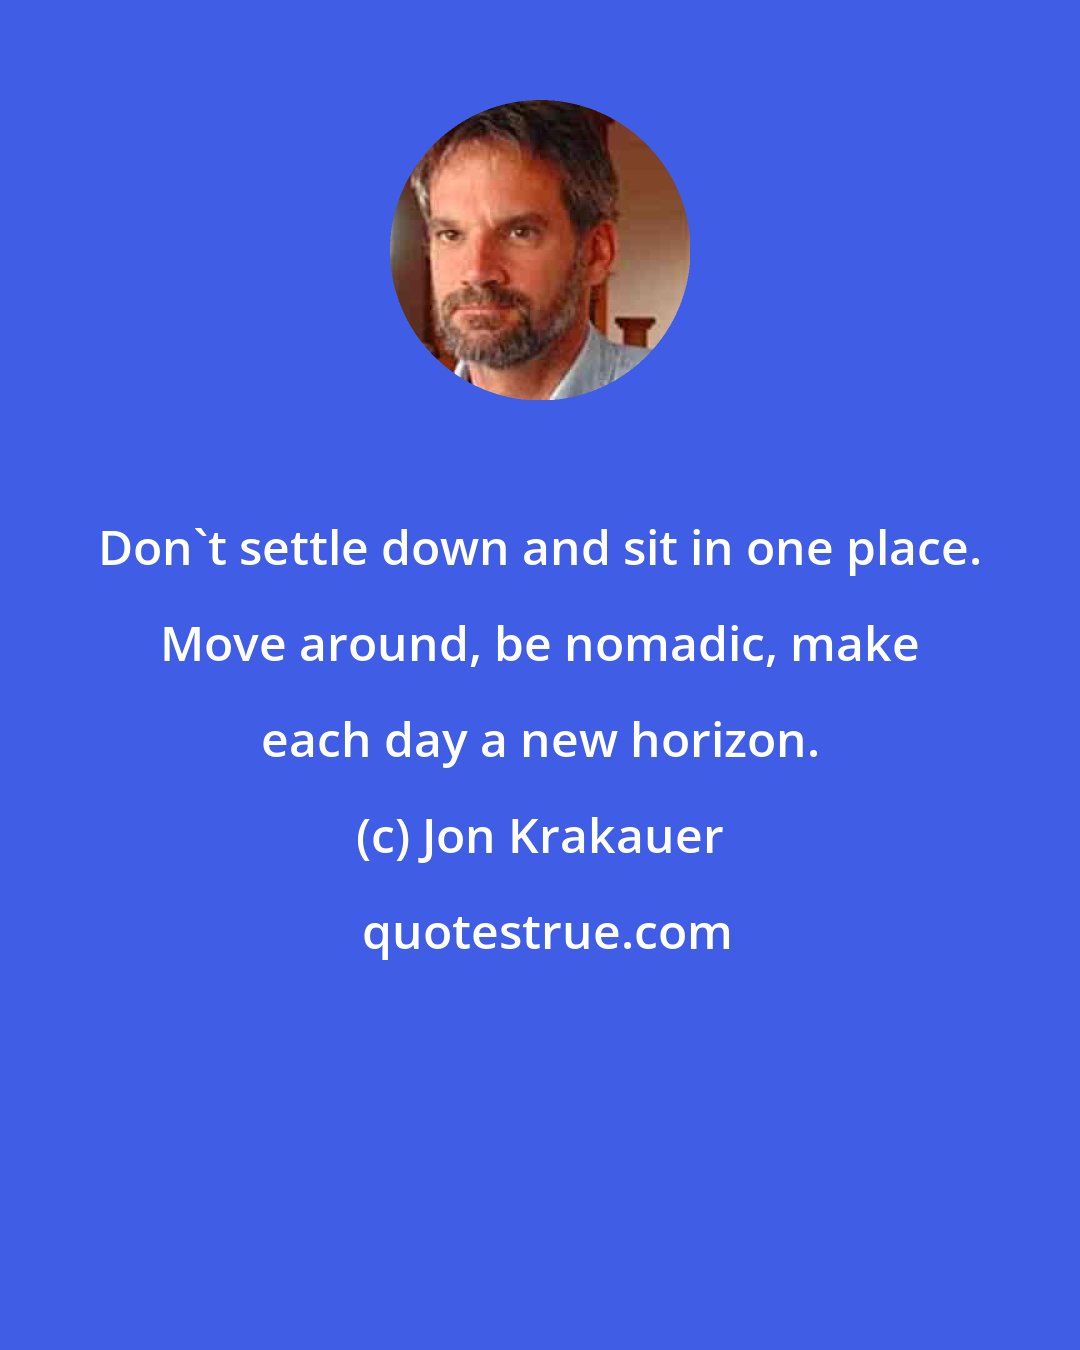 Jon Krakauer: Don't settle down and sit in one place. Move around, be nomadic, make each day a new horizon.